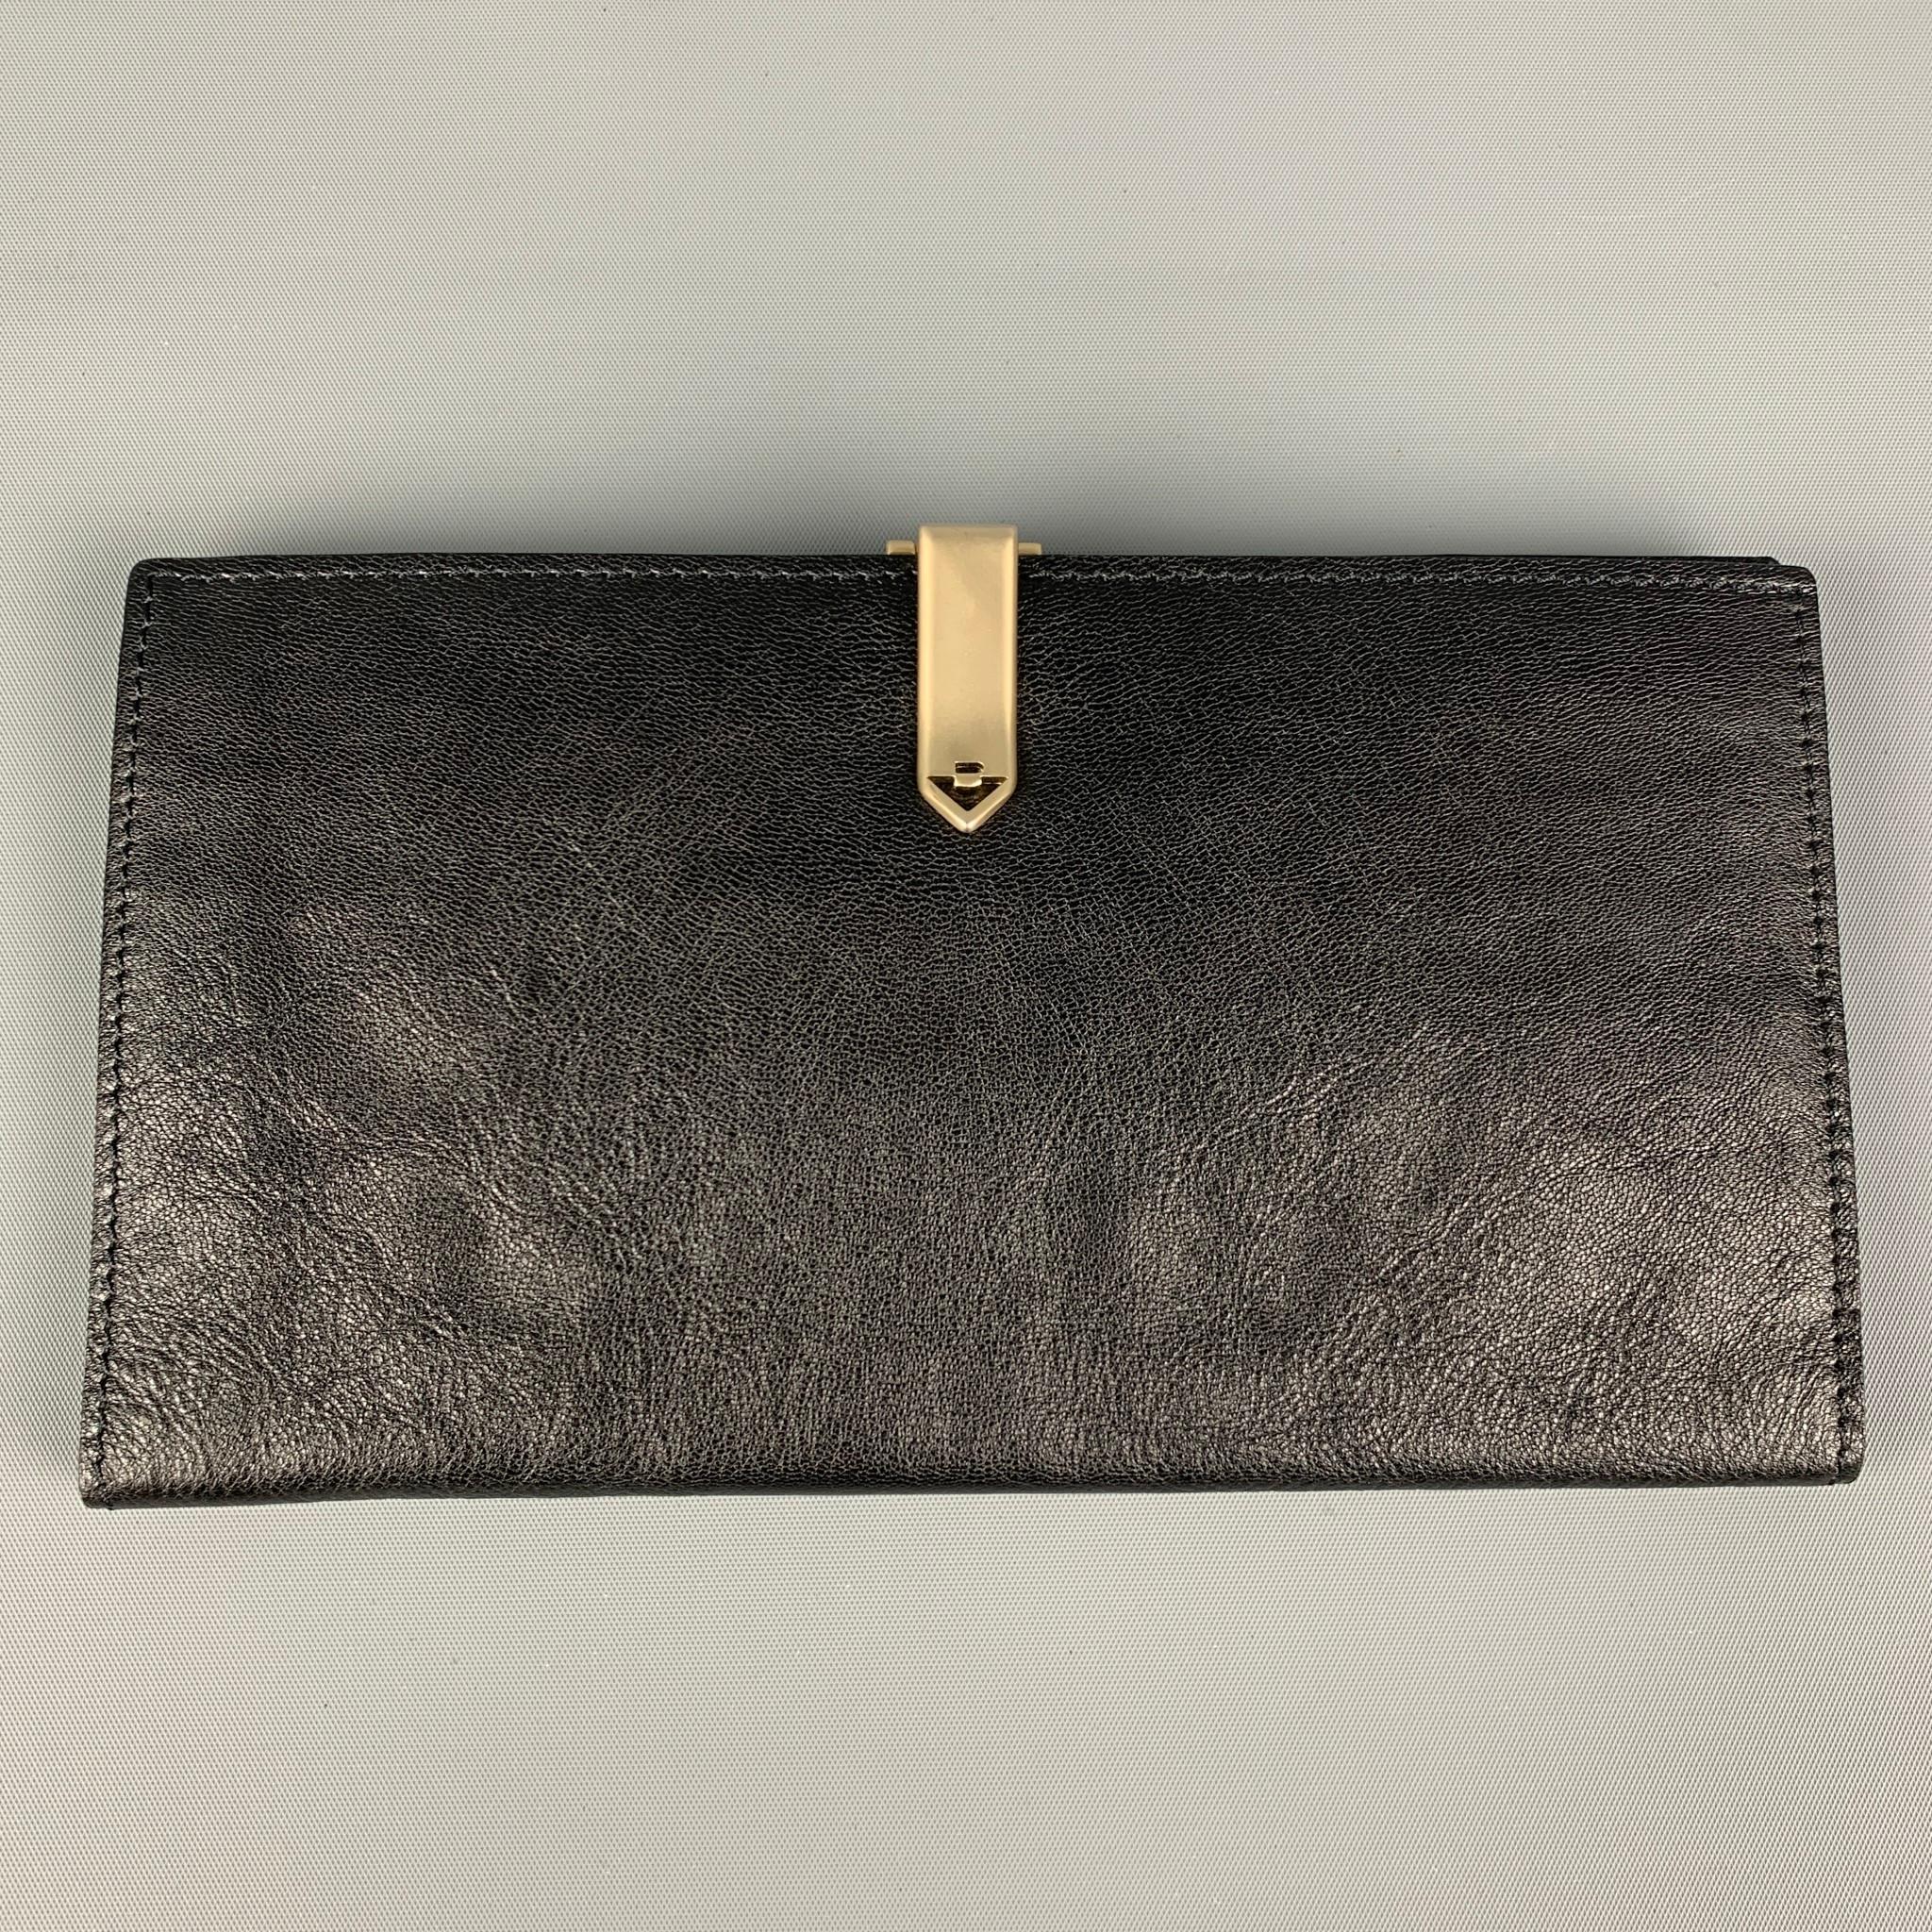 Vintage BOTTEGA VENETA wallet comes in a black woven leather featuring inner card slots and a silver tone clasp closure. Includes dust bag. Made in Italy. 

Very Good Pre-Owned Condition.

Measurements:
Marked: 32557825365NE

Length: 7.25